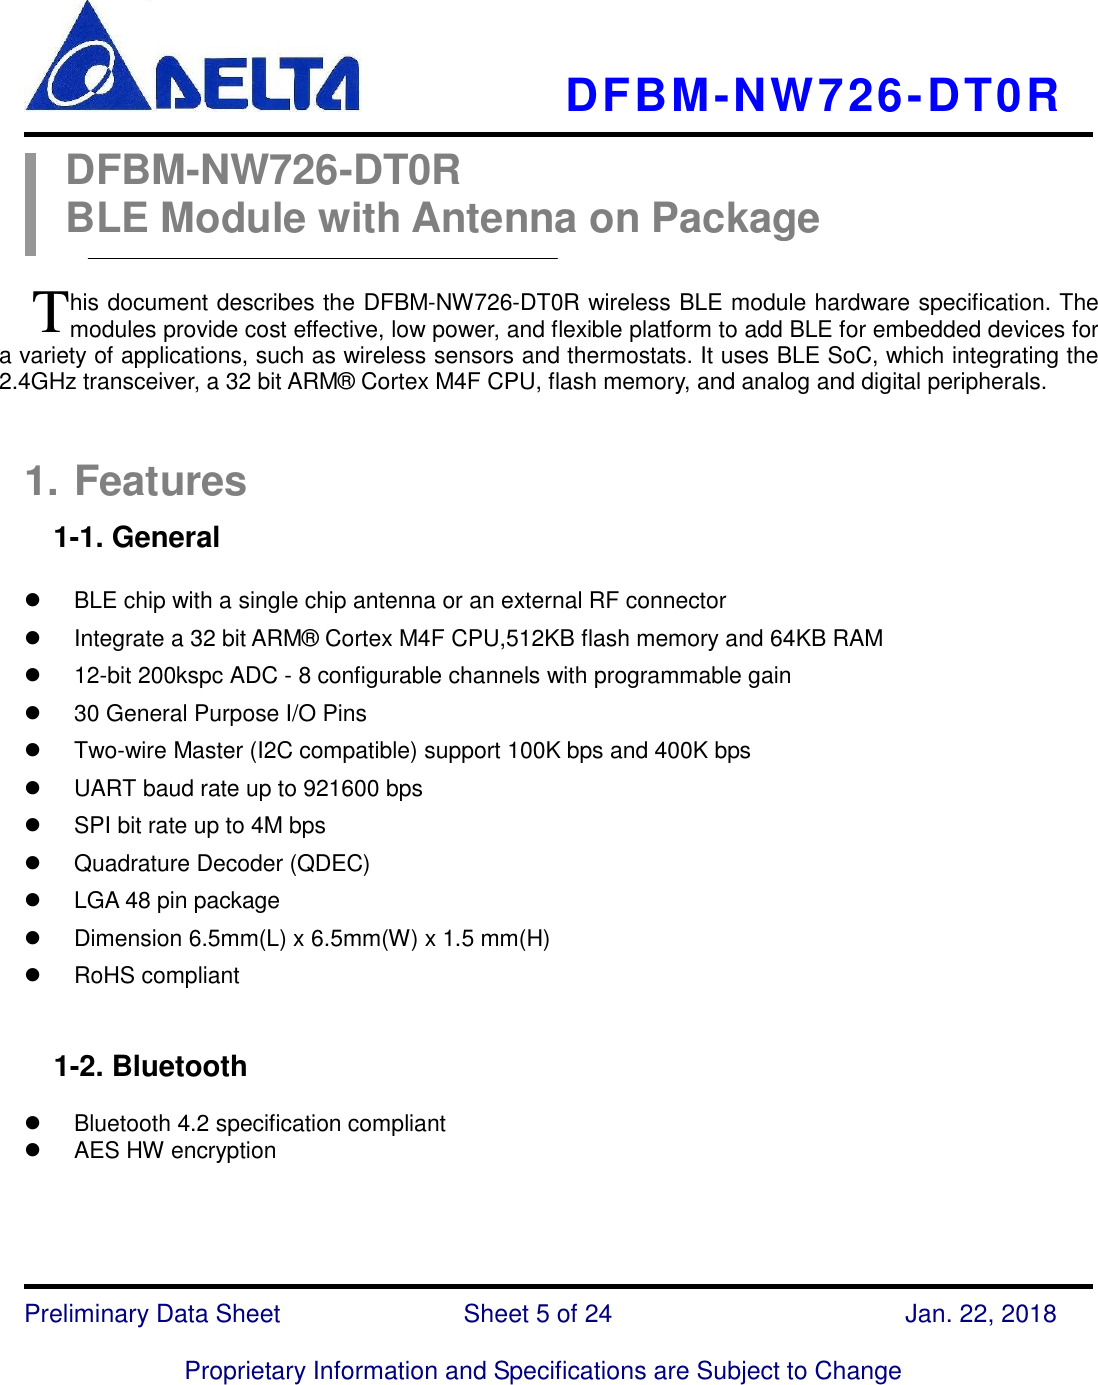     DFBM-NW726-DT0R   Preliminary Data Sheet               Sheet 5 of 24      Jan. 22, 2018  Proprietary Information and Specifications are Subject to Change  DFBM-NW726-DT0R BLE Module with Antenna on Package  his document describes the DFBM-NW726-DT0R wireless BLE module hardware specification. The modules provide cost effective, low power, and flexible platform to add BLE for embedded devices for a variety of applications, such as wireless sensors and thermostats. It uses BLE SoC, which integrating the 2.4GHz transceiver, a 32 bit ARM®  Cortex M4F CPU, flash memory, and analog and digital peripherals.  1. Features 1-1. General      BLE chip with a single chip antenna or an external RF connector     Integrate a 32 bit ARM®  Cortex M4F CPU,512KB flash memory and 64KB RAM  12-bit 200kspc ADC - 8 configurable channels with programmable gain  30 General Purpose I/O Pins   Two-wire Master (I2C compatible) support 100K bps and 400K bps   UART baud rate up to 921600 bps     SPI bit rate up to 4M bps   Quadrature Decoder (QDEC)   LGA 48 pin package   Dimension 6.5mm(L) x 6.5mm(W) x 1.5 mm(H)   RoHS compliant     1-2. Bluetooth    Bluetooth 4.2 specification compliant     AES HW encryption    T 